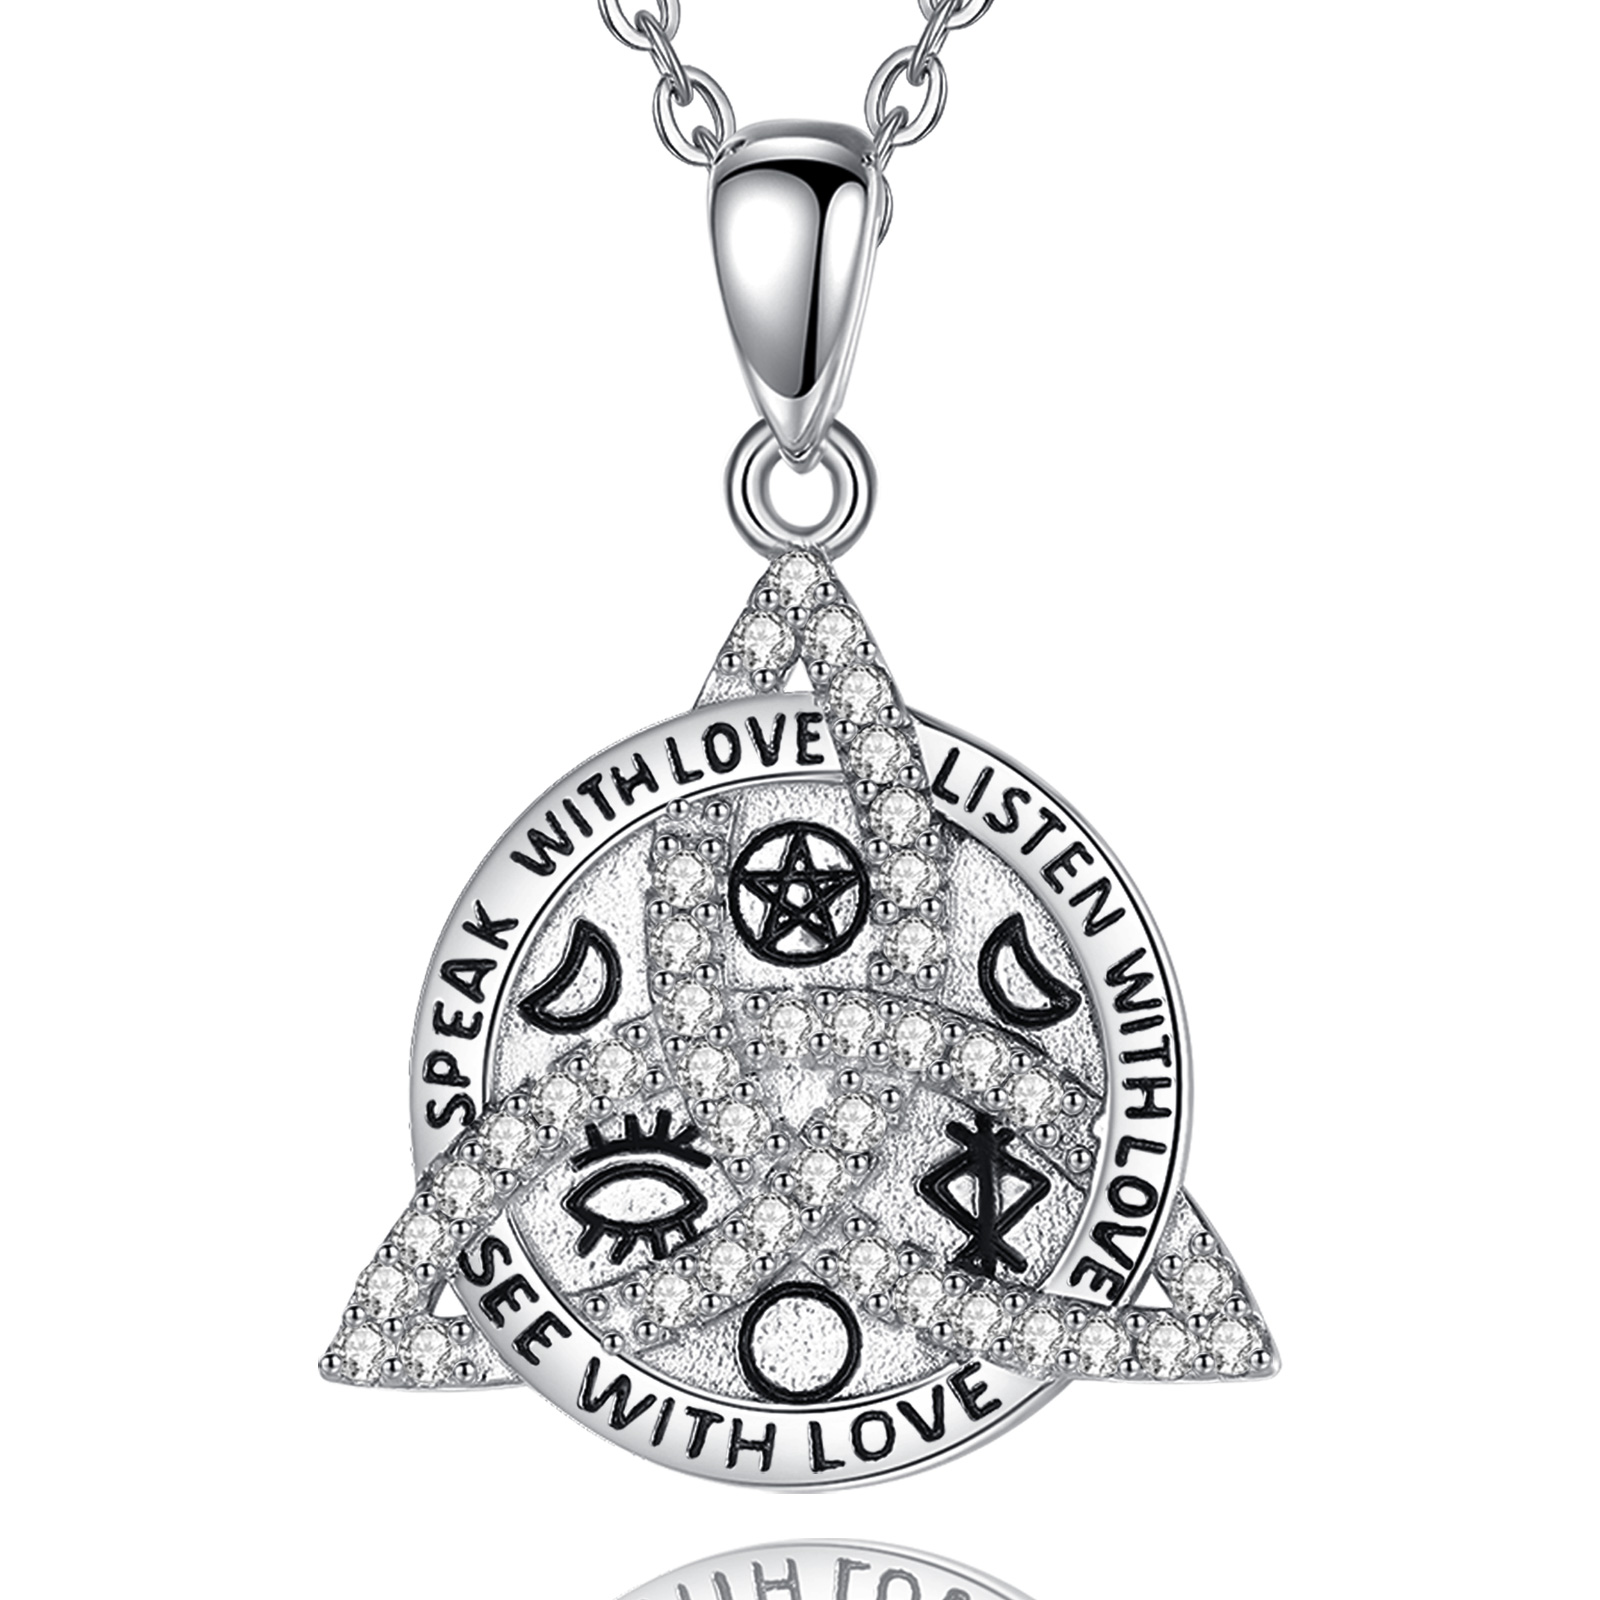 Merryshine Jewelry 925 Sterling Silver Viking Rune Celtic Knot Pendant Necklace with Cubic Zirconia